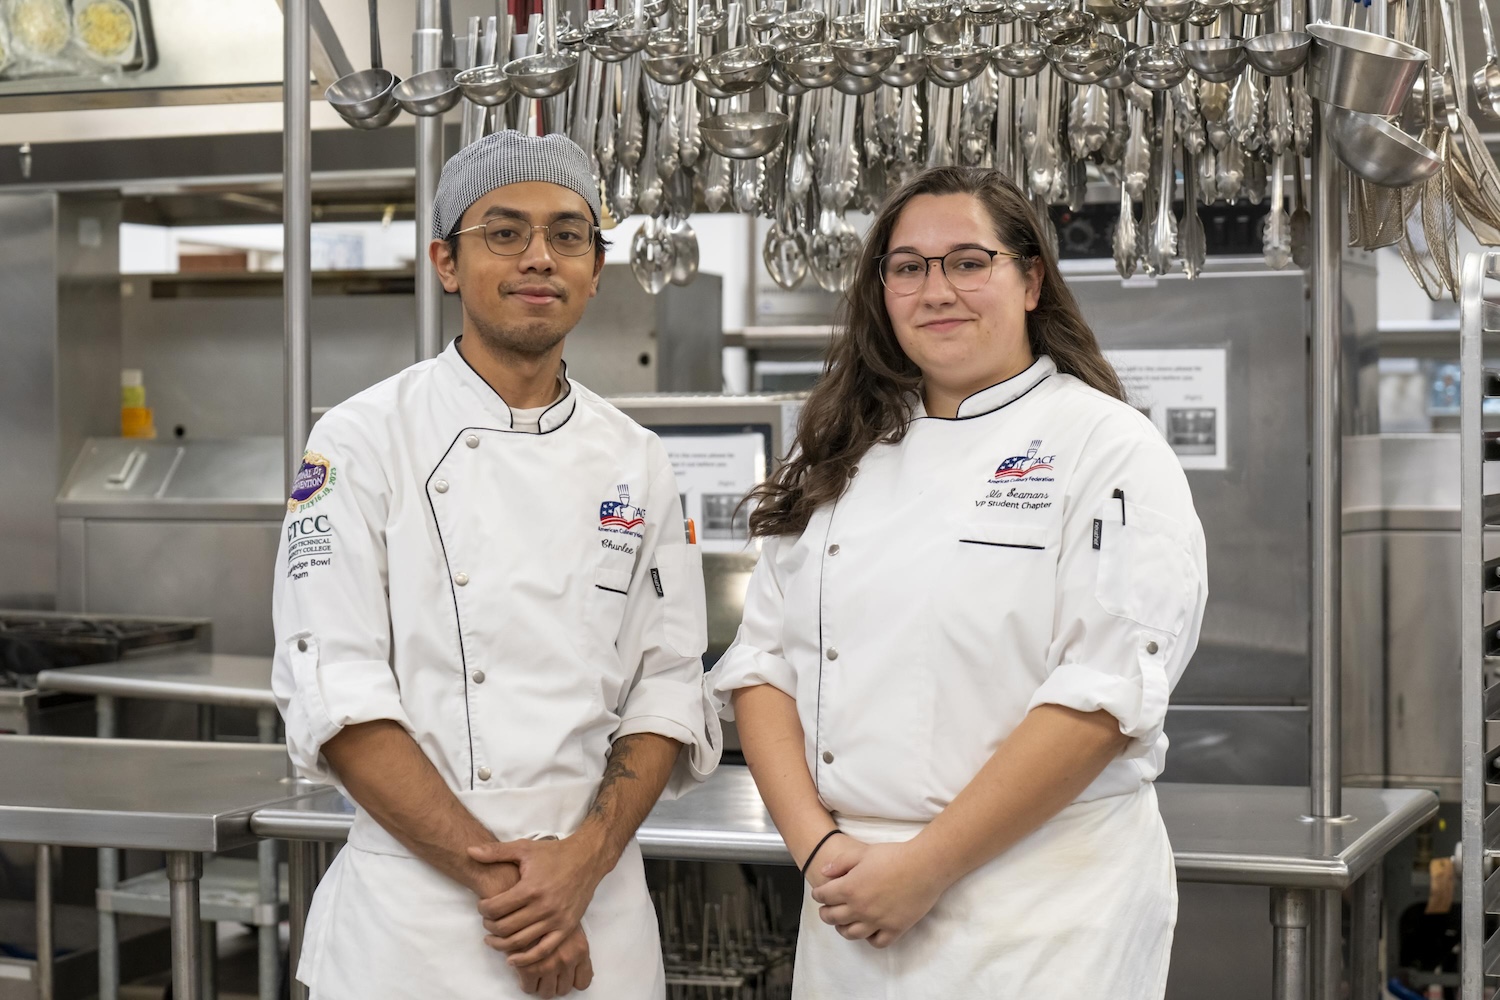 GTCC culinary students hope competition will help lead to solid careers in the field